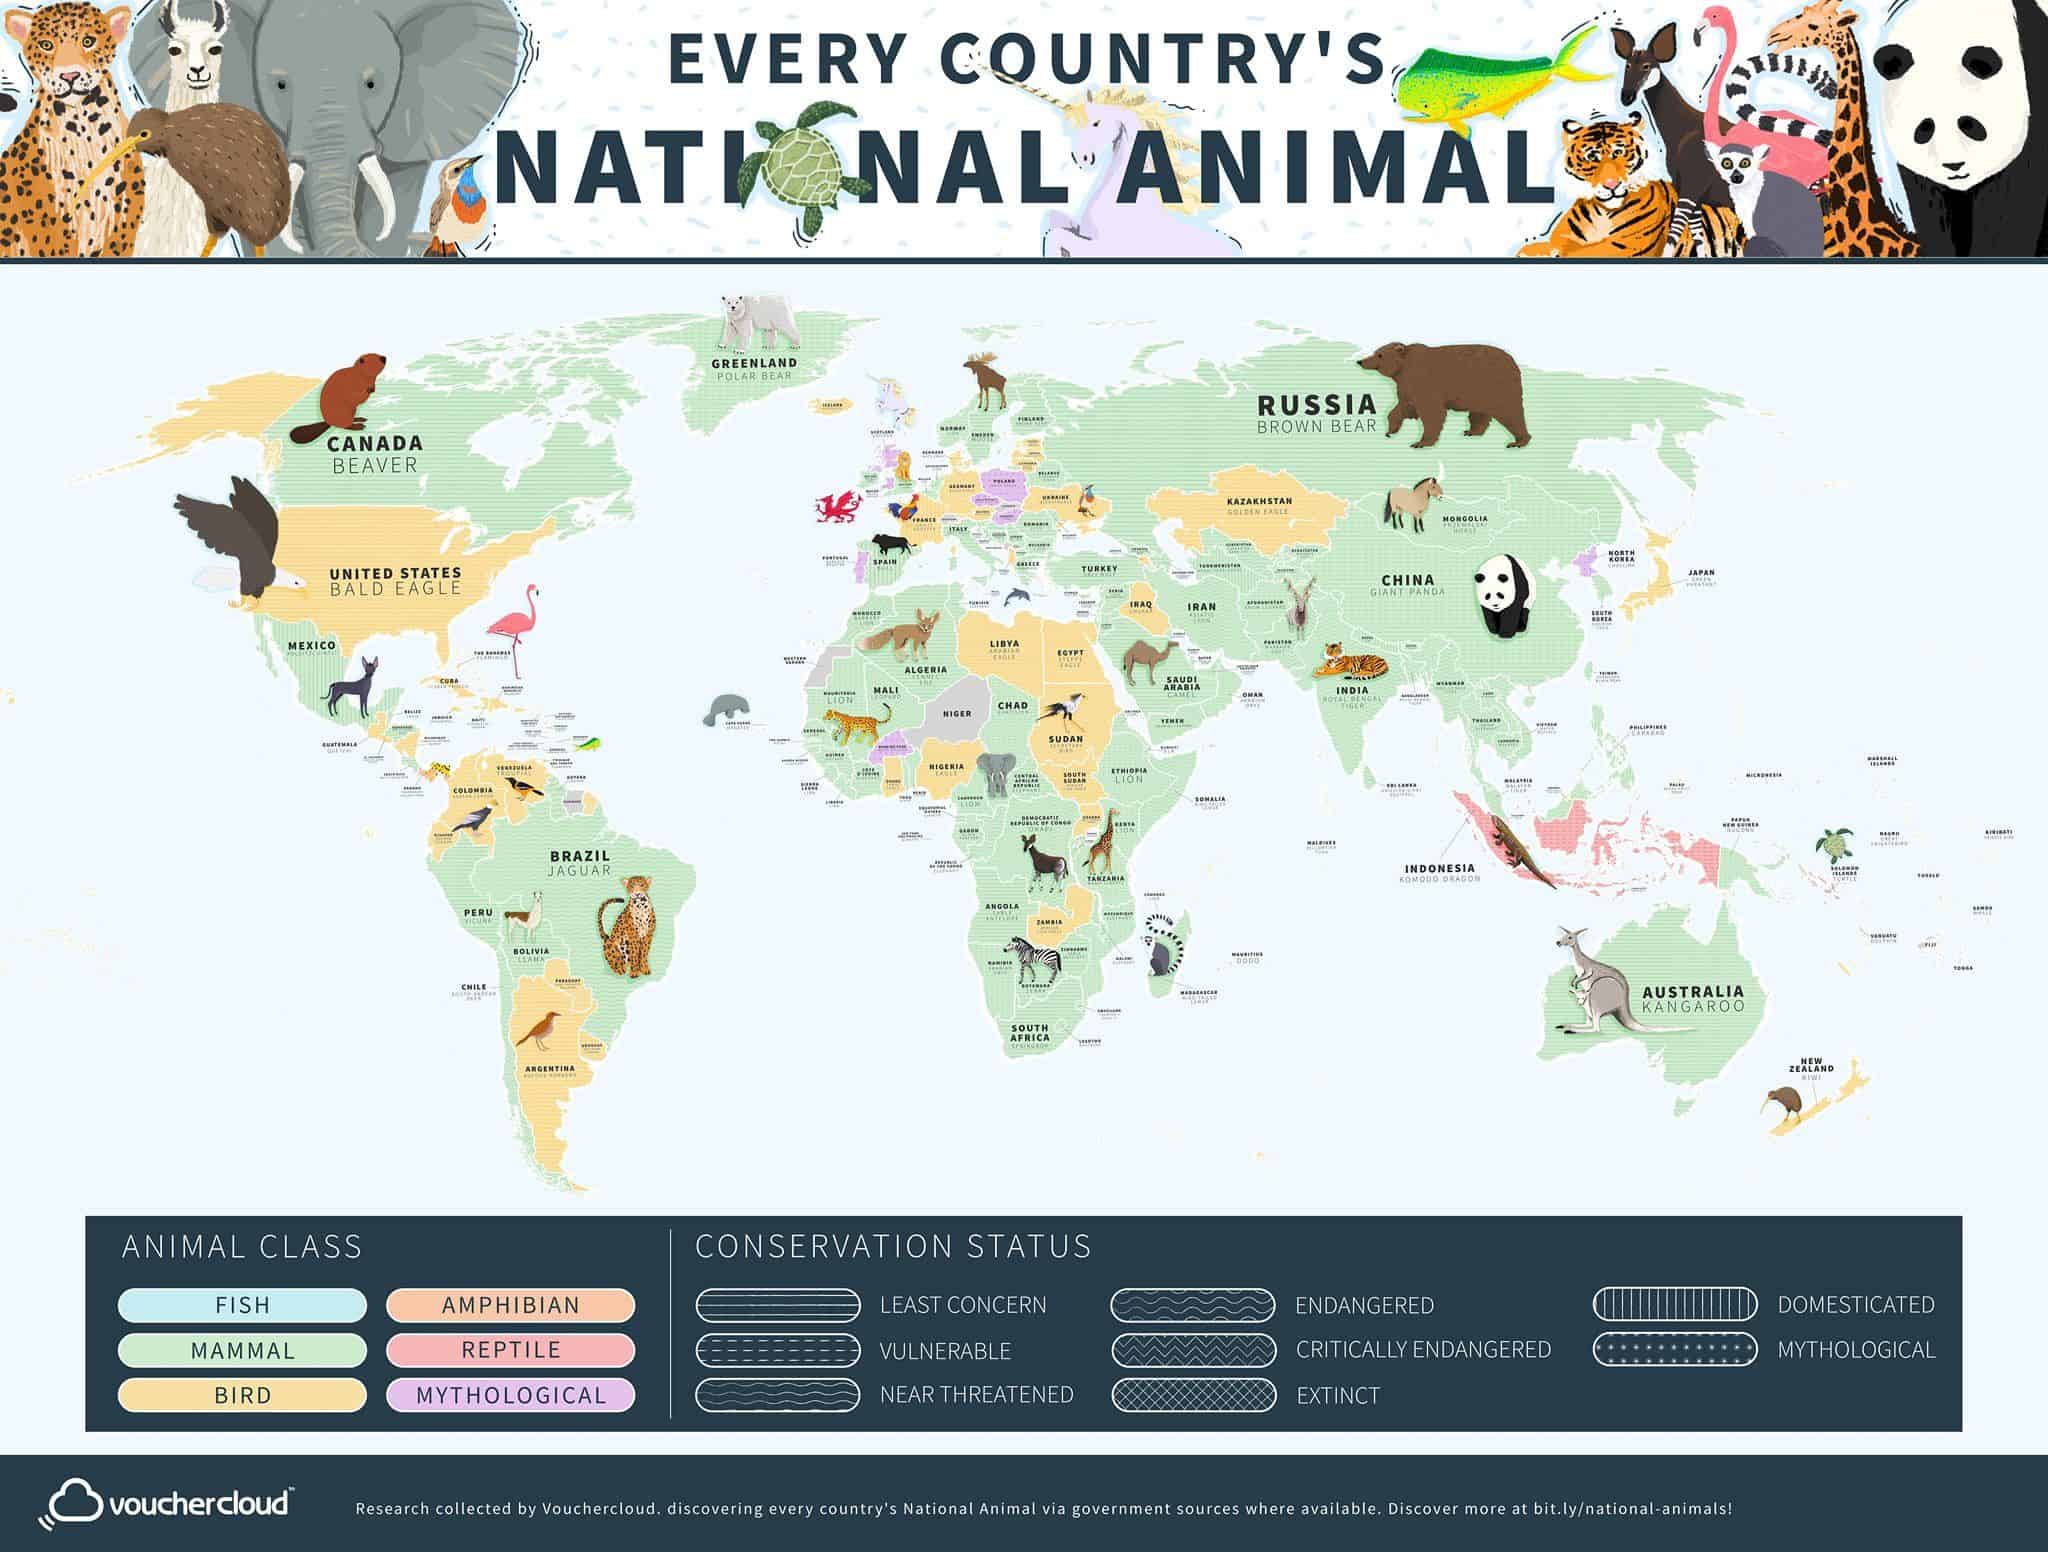 Every Country's National Animal On One Cool Map - Flytrippers